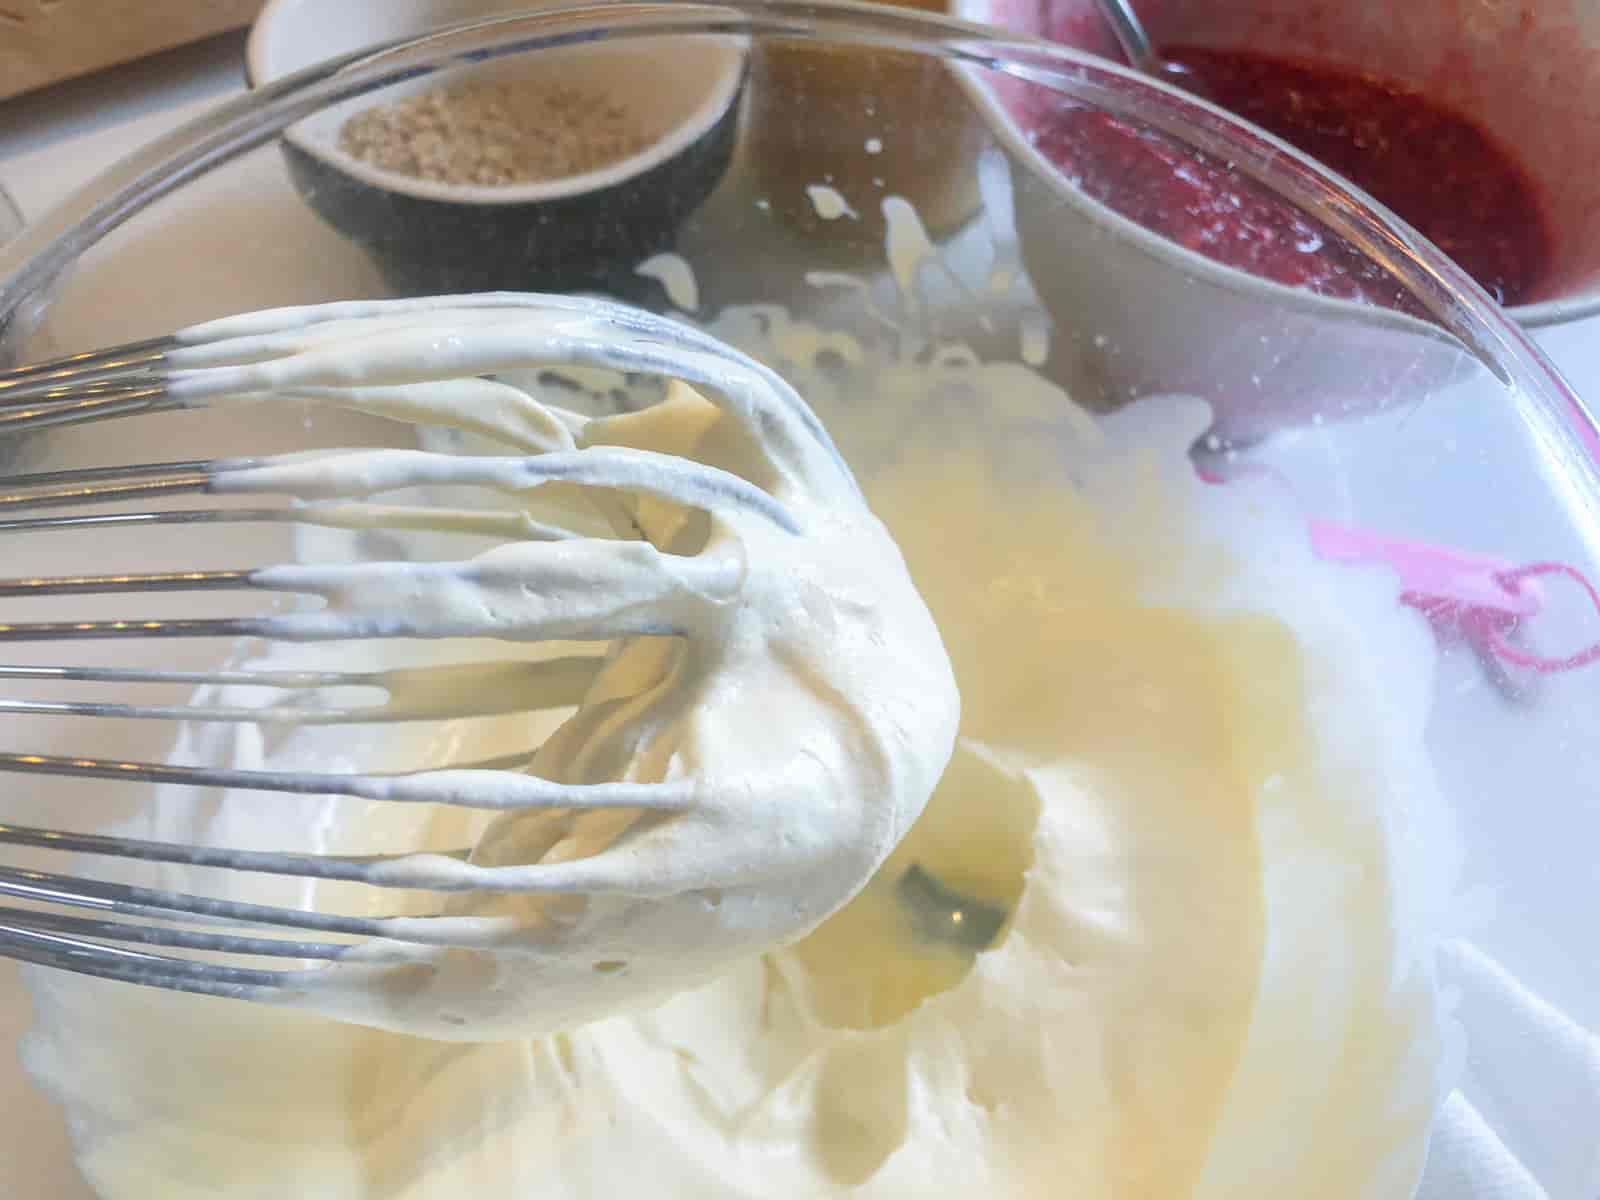 Double cream whipped to a soft peak stage.